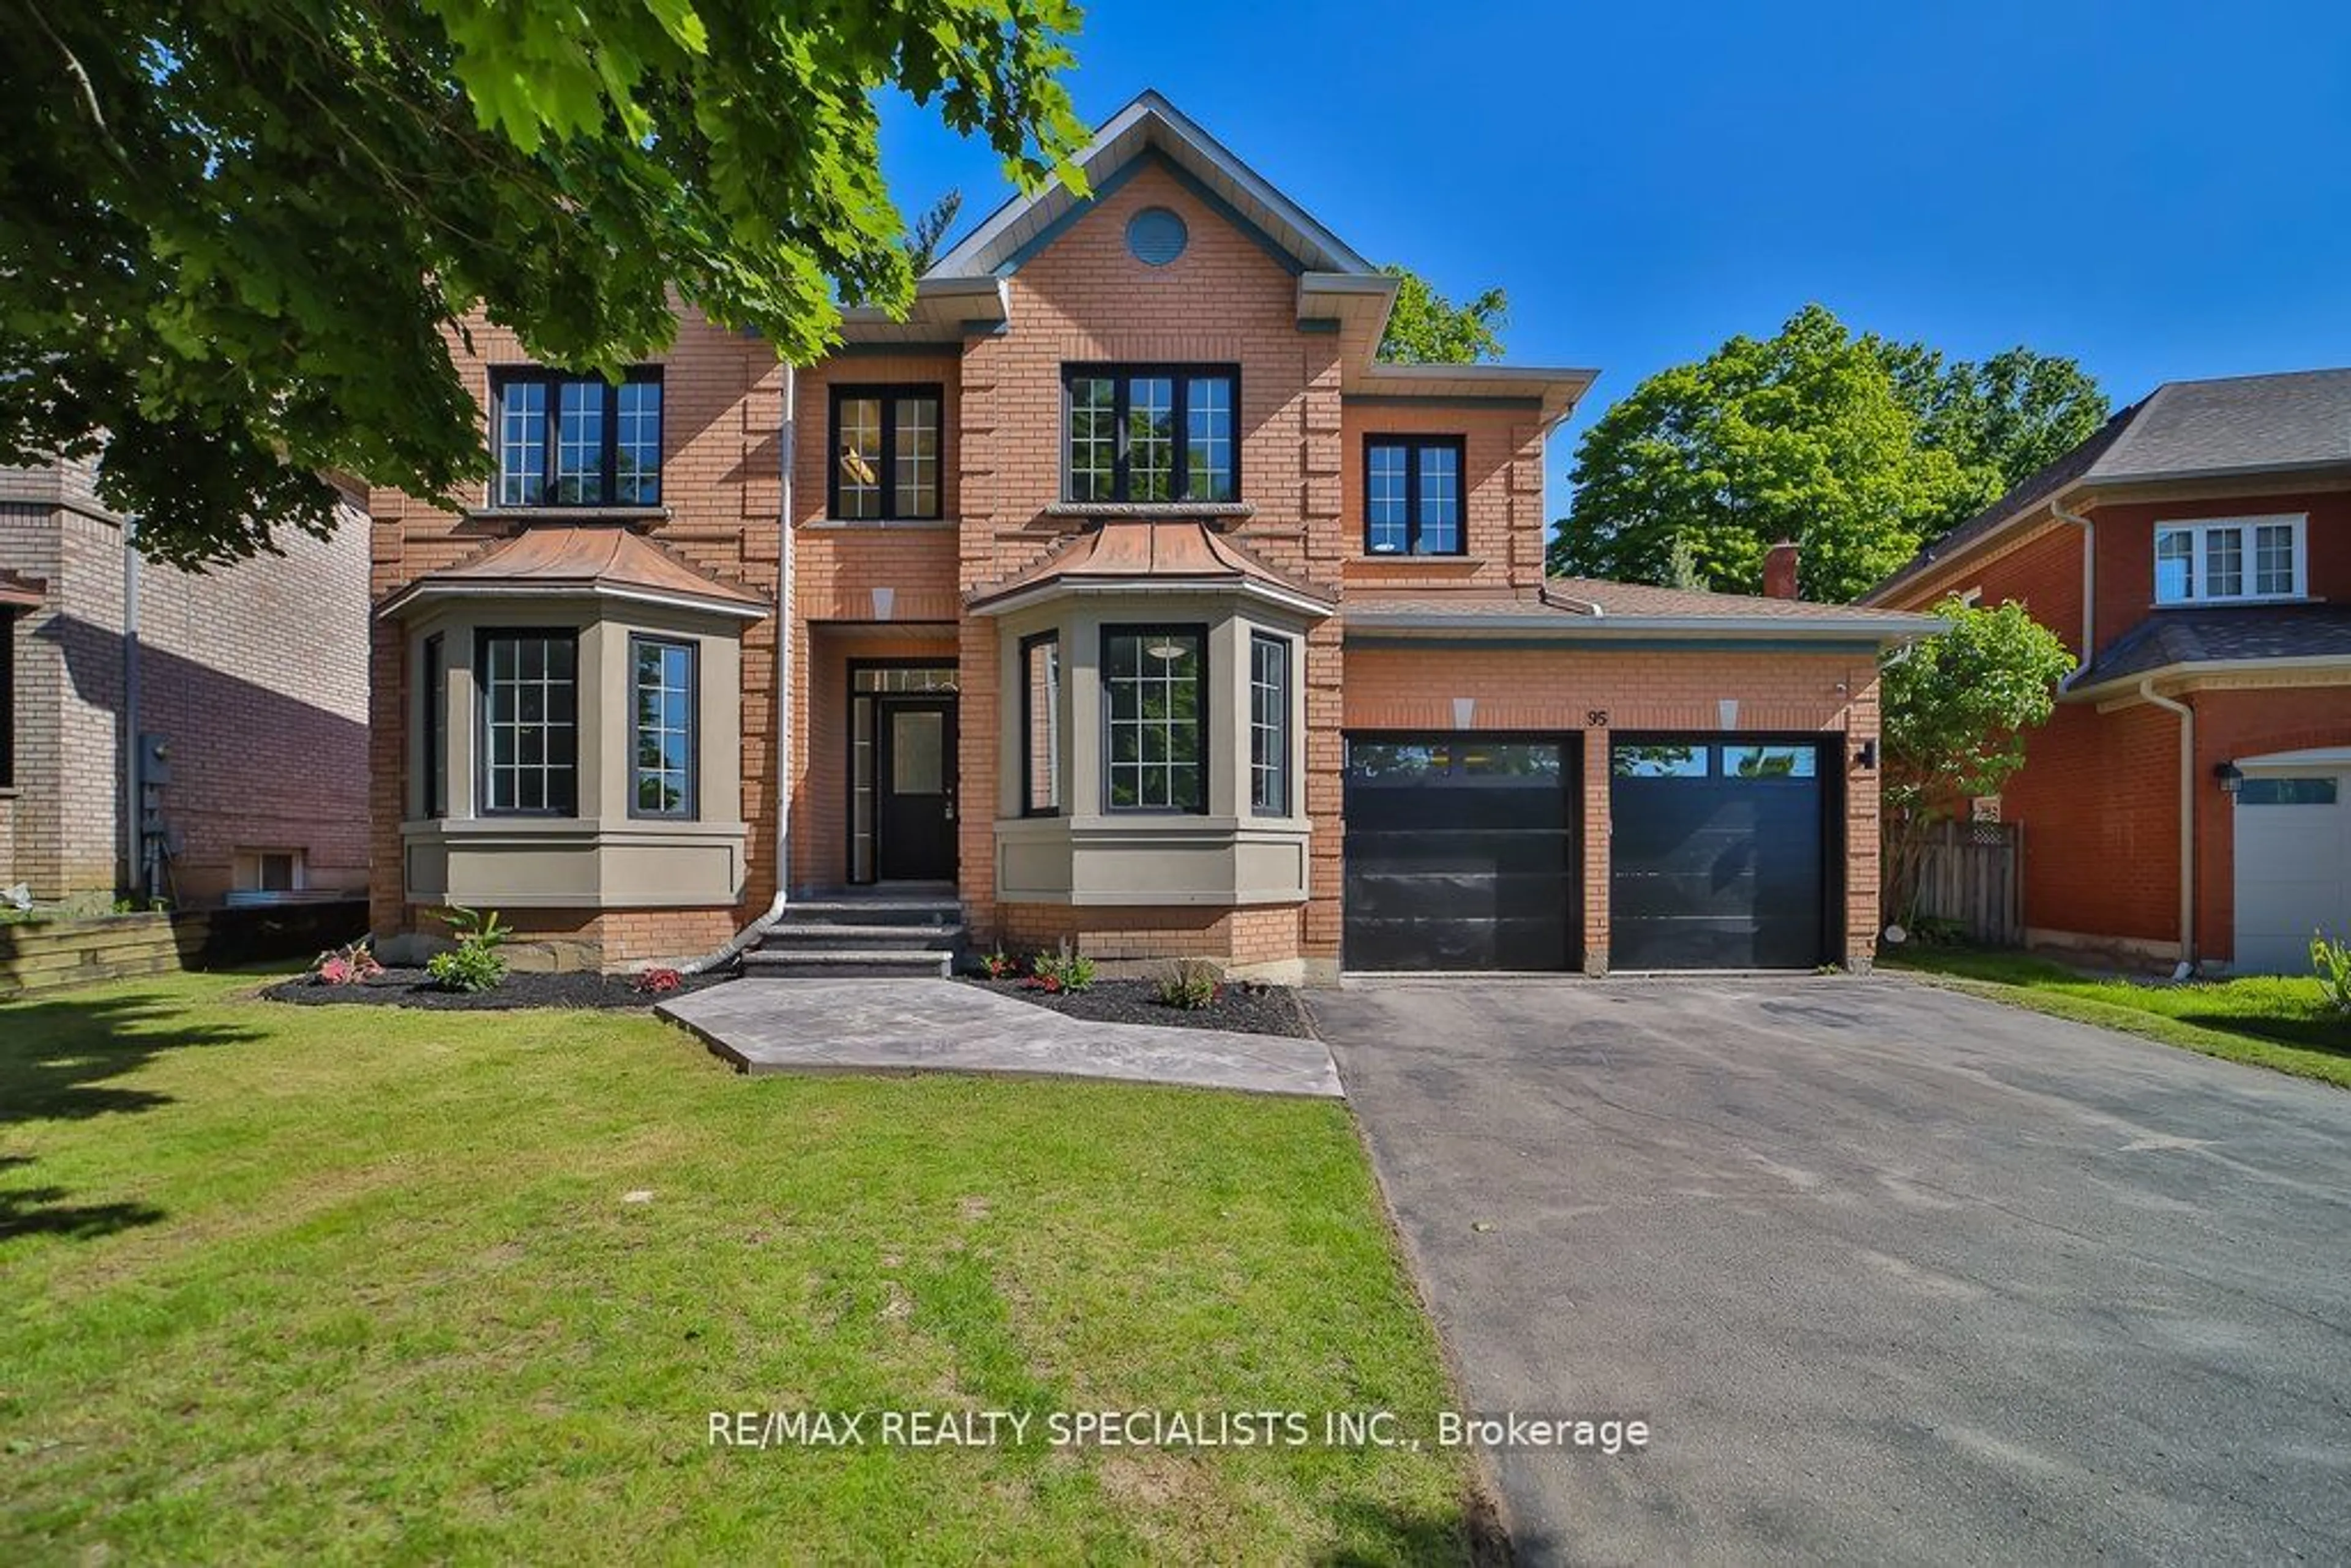 Home with brick exterior material for 95 Luba Ave, Richmond Hill Ontario L4S 1G7